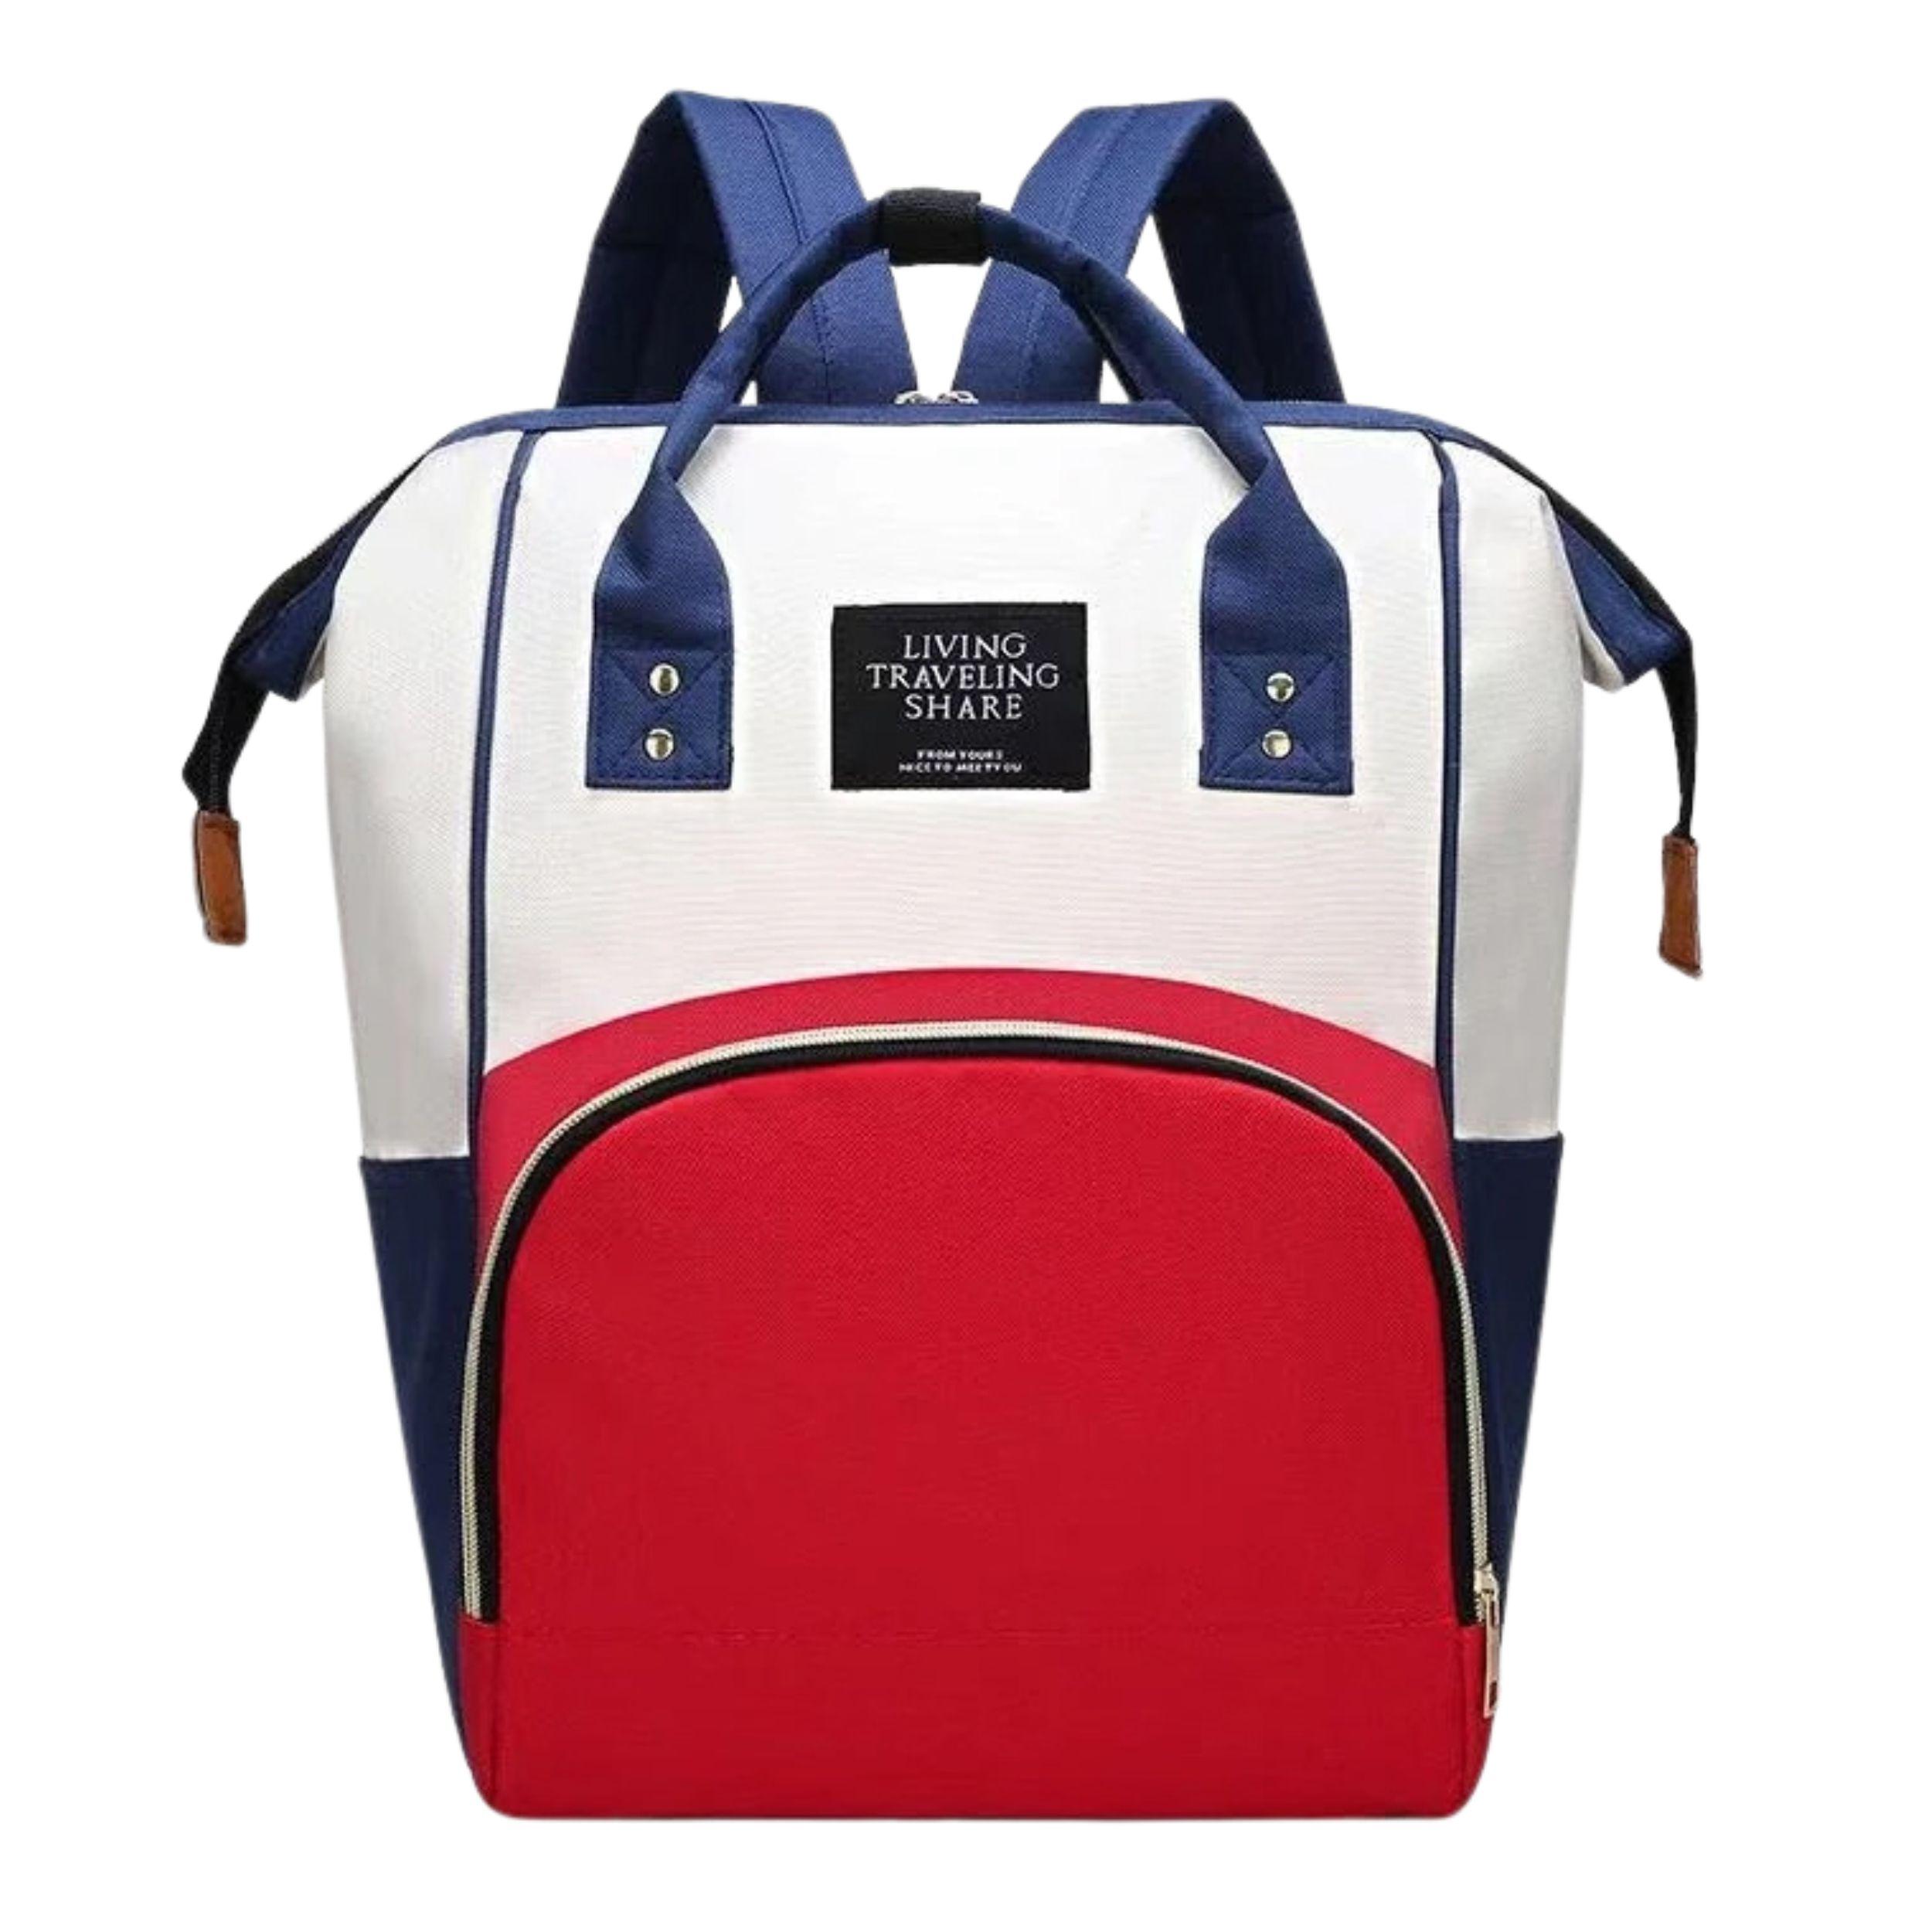 Backpack / bag for mum - white, red and blue